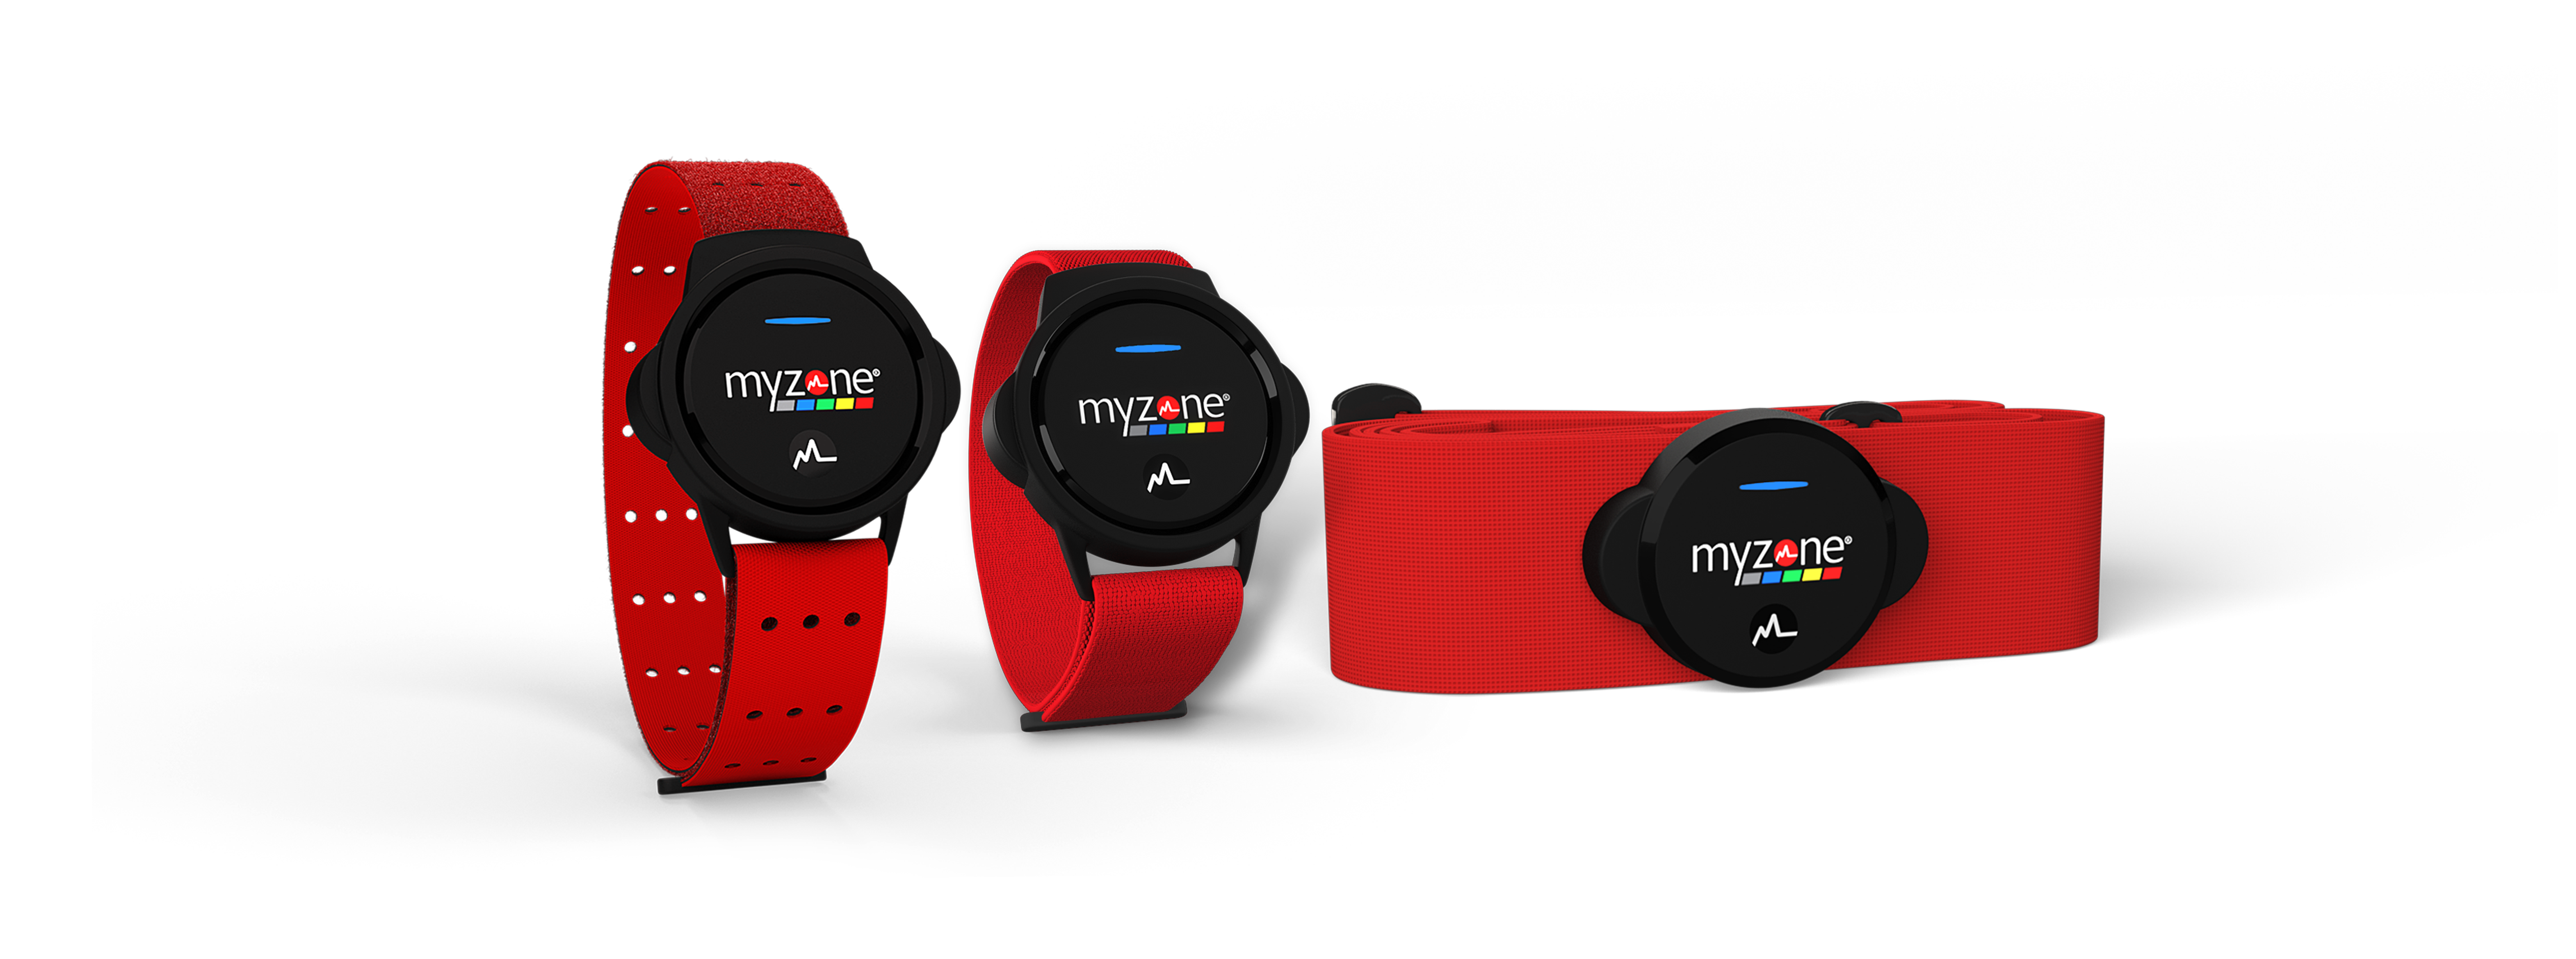 Myzone Devices